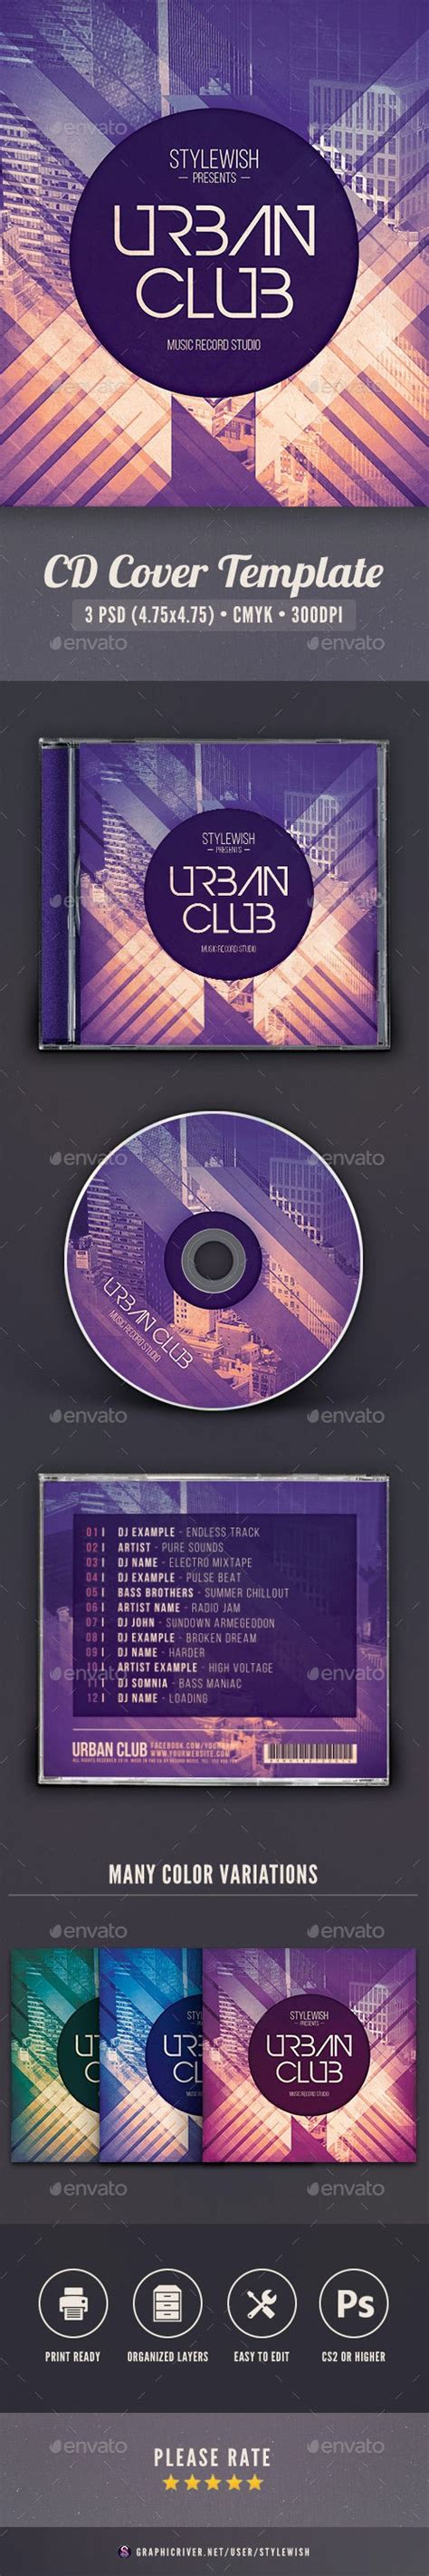 Urban Club Cd Cover Artwork By Stylewish Graphicriver